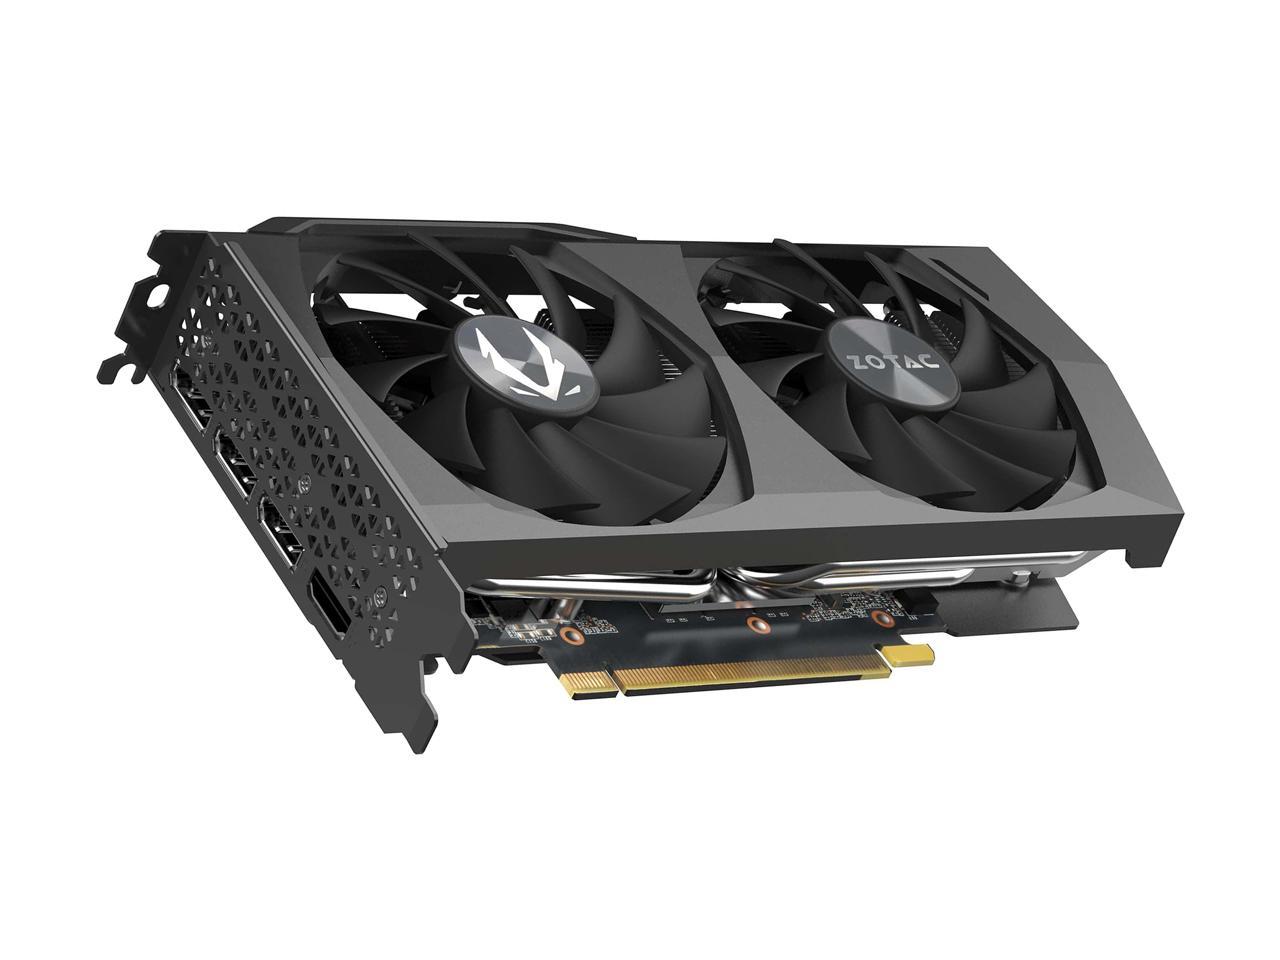 ZOTAC GAMING GeForce RTX 3060 Twin Edge 12GB GDDR6 192-bit 15 Gbps PCIE 4.0 Gaming Graphics Card, IceStorm 2.0 Cooling, Active Fan Control, FREEZE Fan Stop, ZT-A30600E-10M